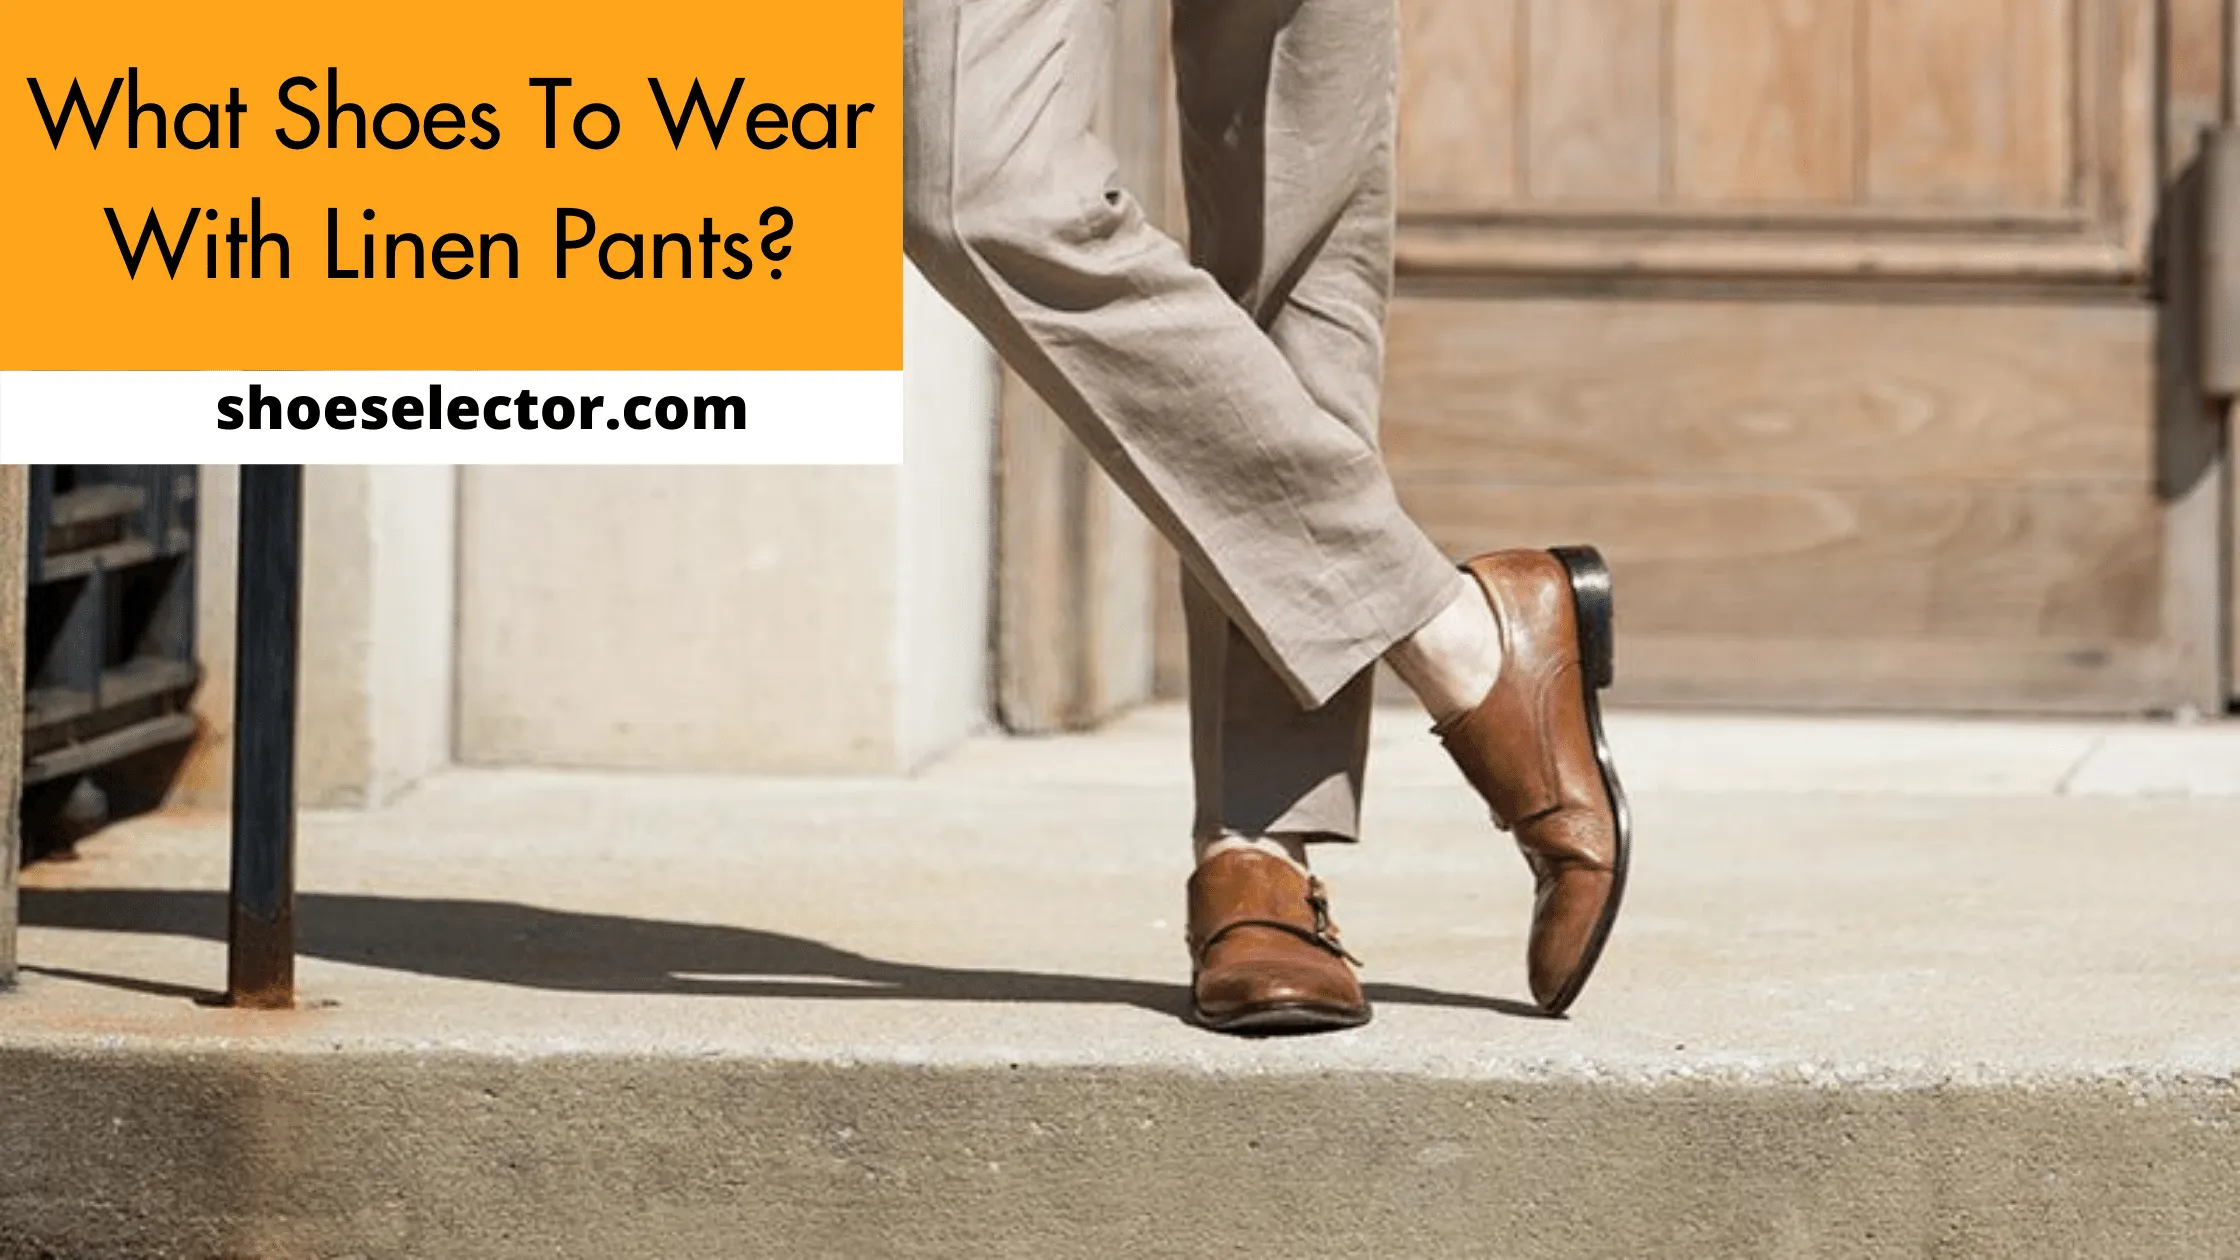 What Shoes To Wear With Linen Pants? Latest Guide